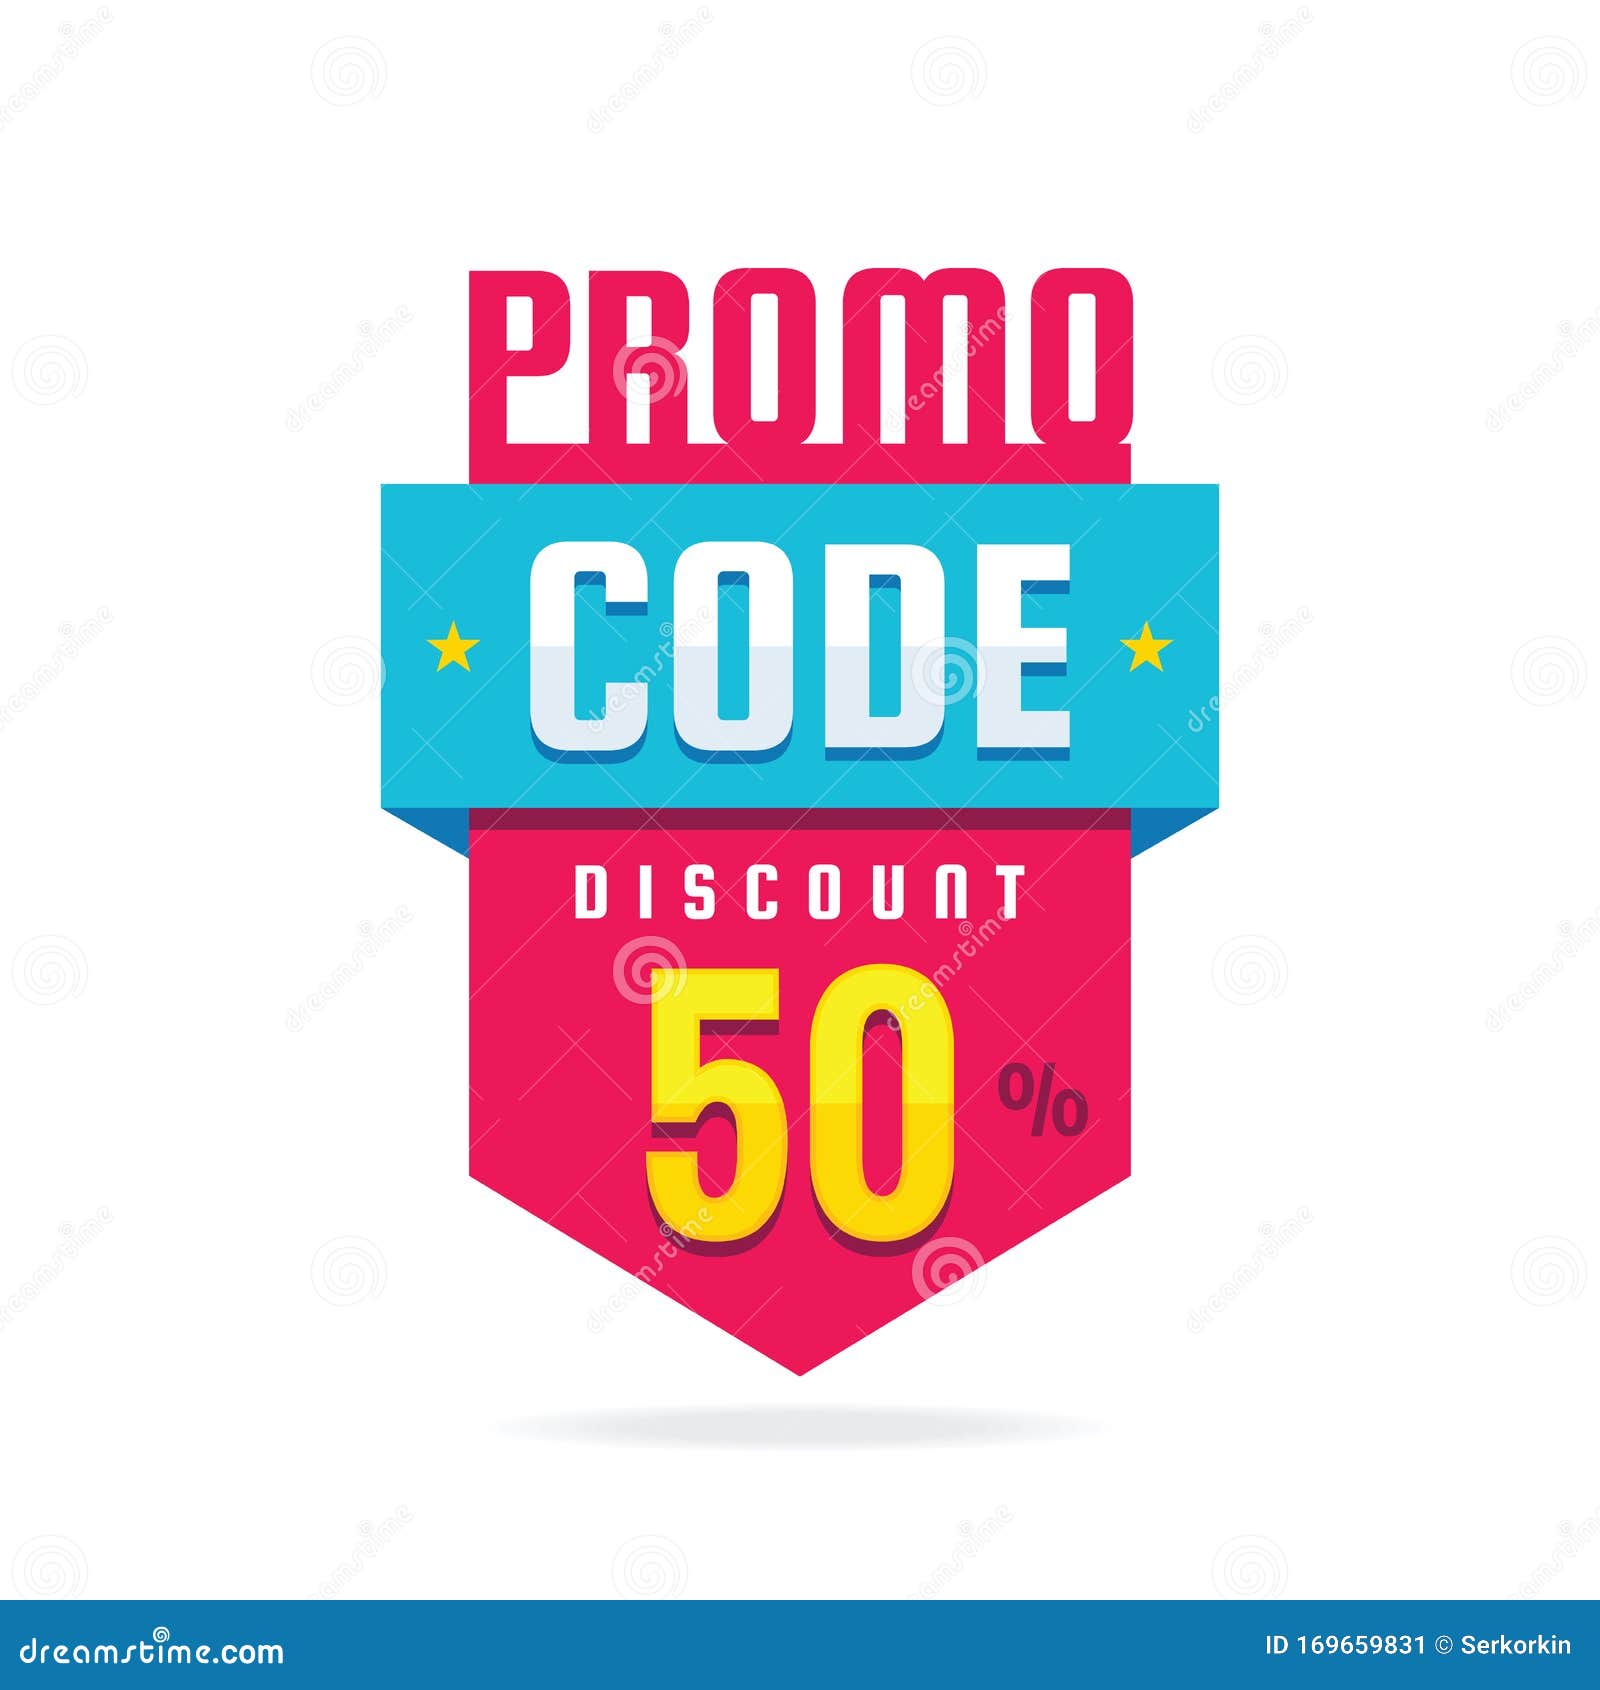 Promo code coupon code flat badge design on white Vector Image